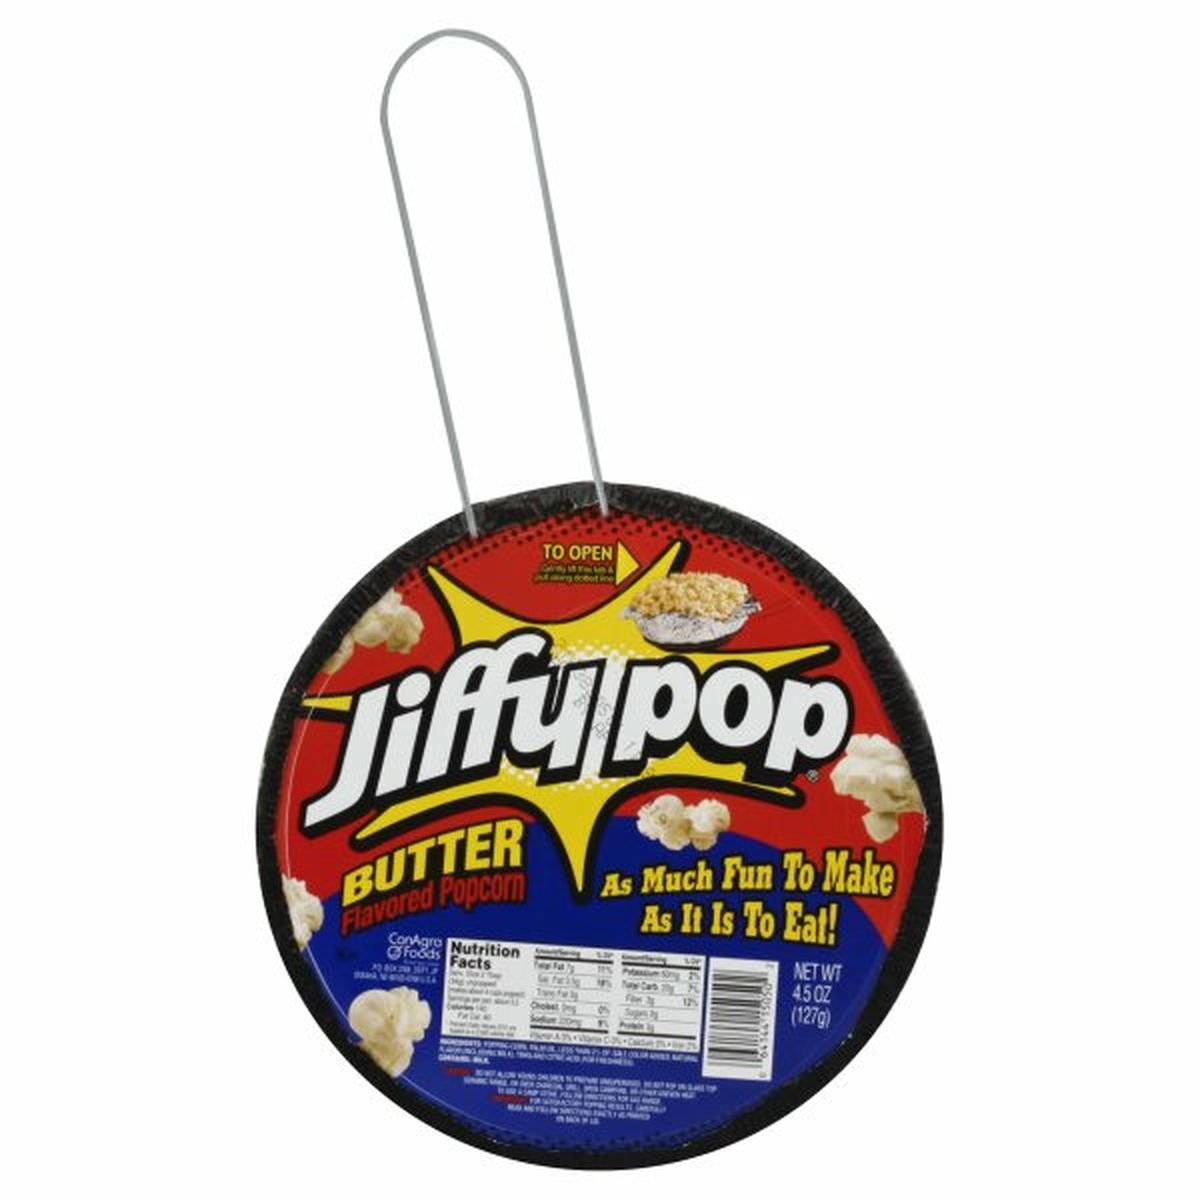 Calories in Jiffy Pop Flavored Popcorn, Butter